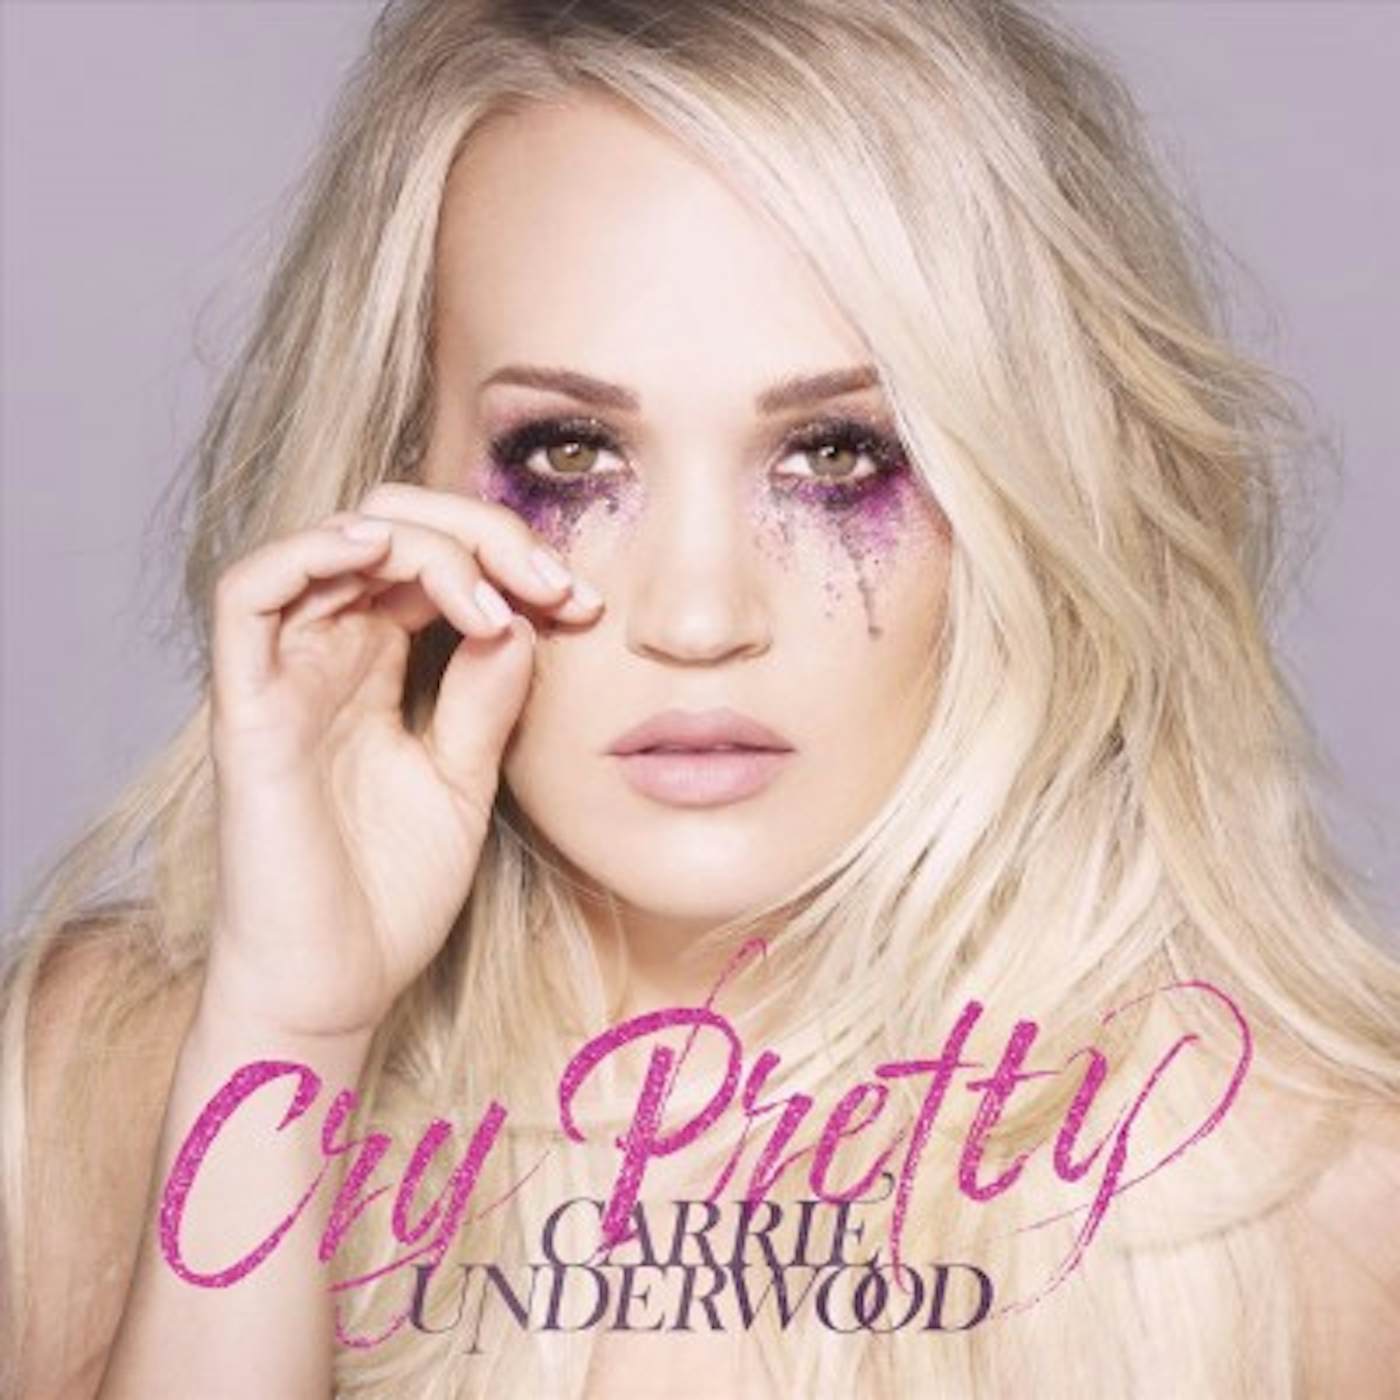 Carrie Underwood CRY PRETTY CD